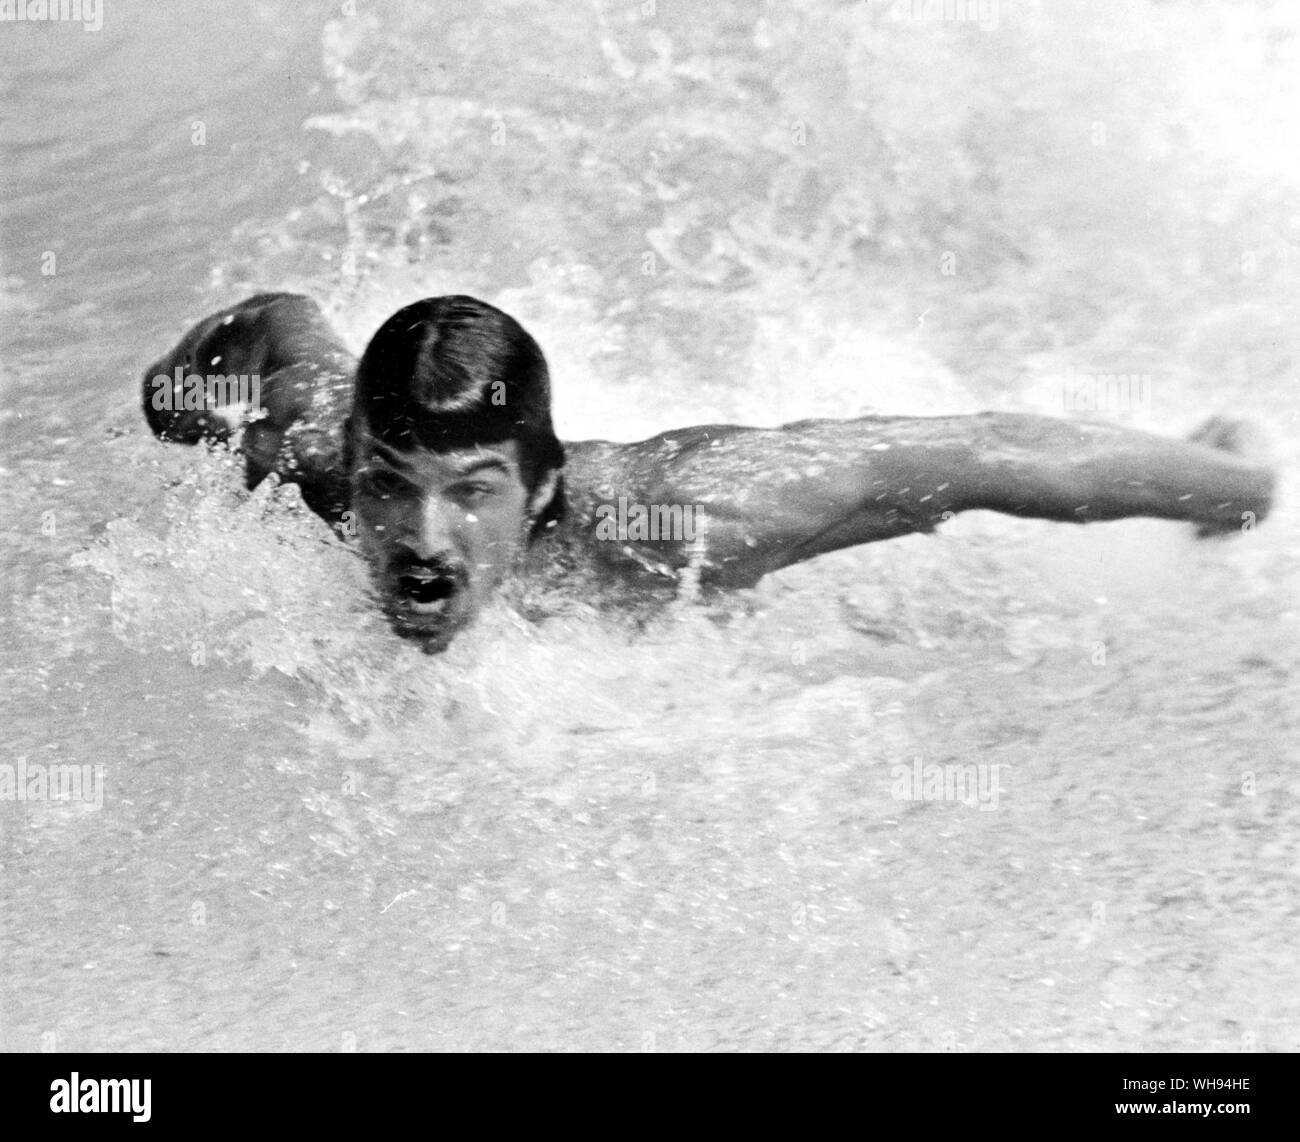 September 1972: Munich Olympics: American swimmer, Mark Spitz (USA) wins his 7th gold medal. Stock Photo